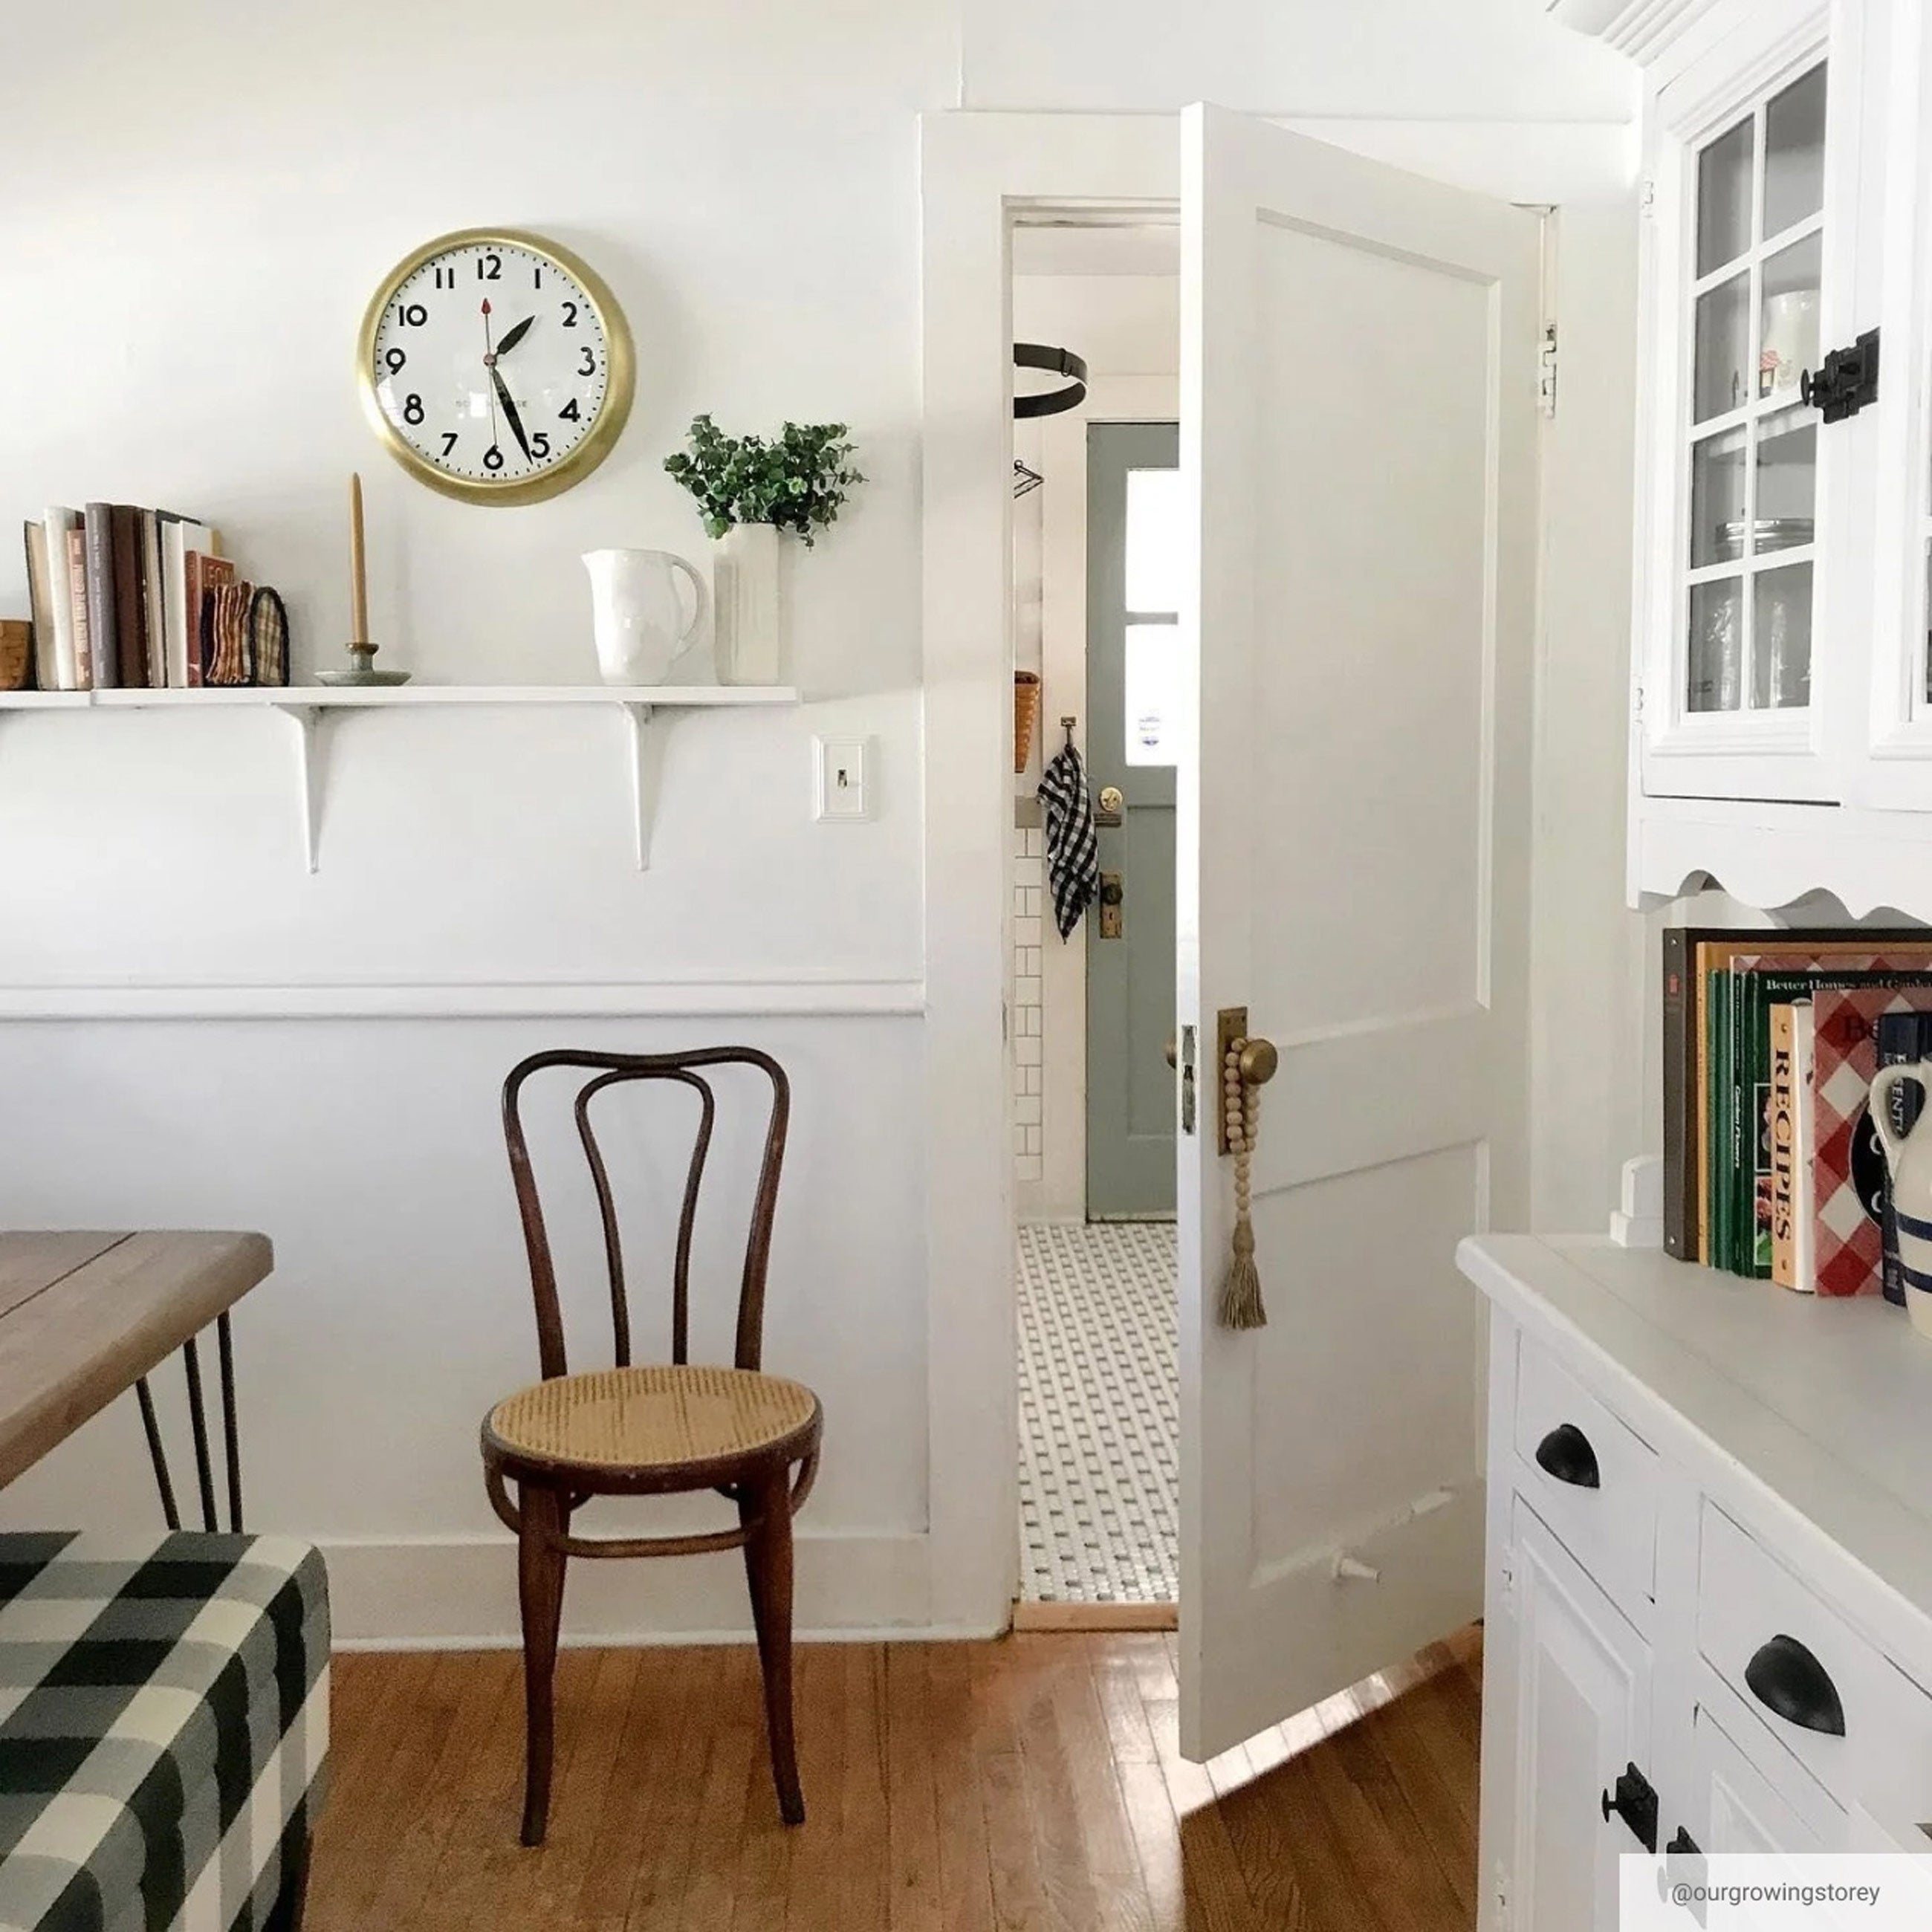 Brass wall clock above white shelf holding books and greenery in bright white kitchen space.